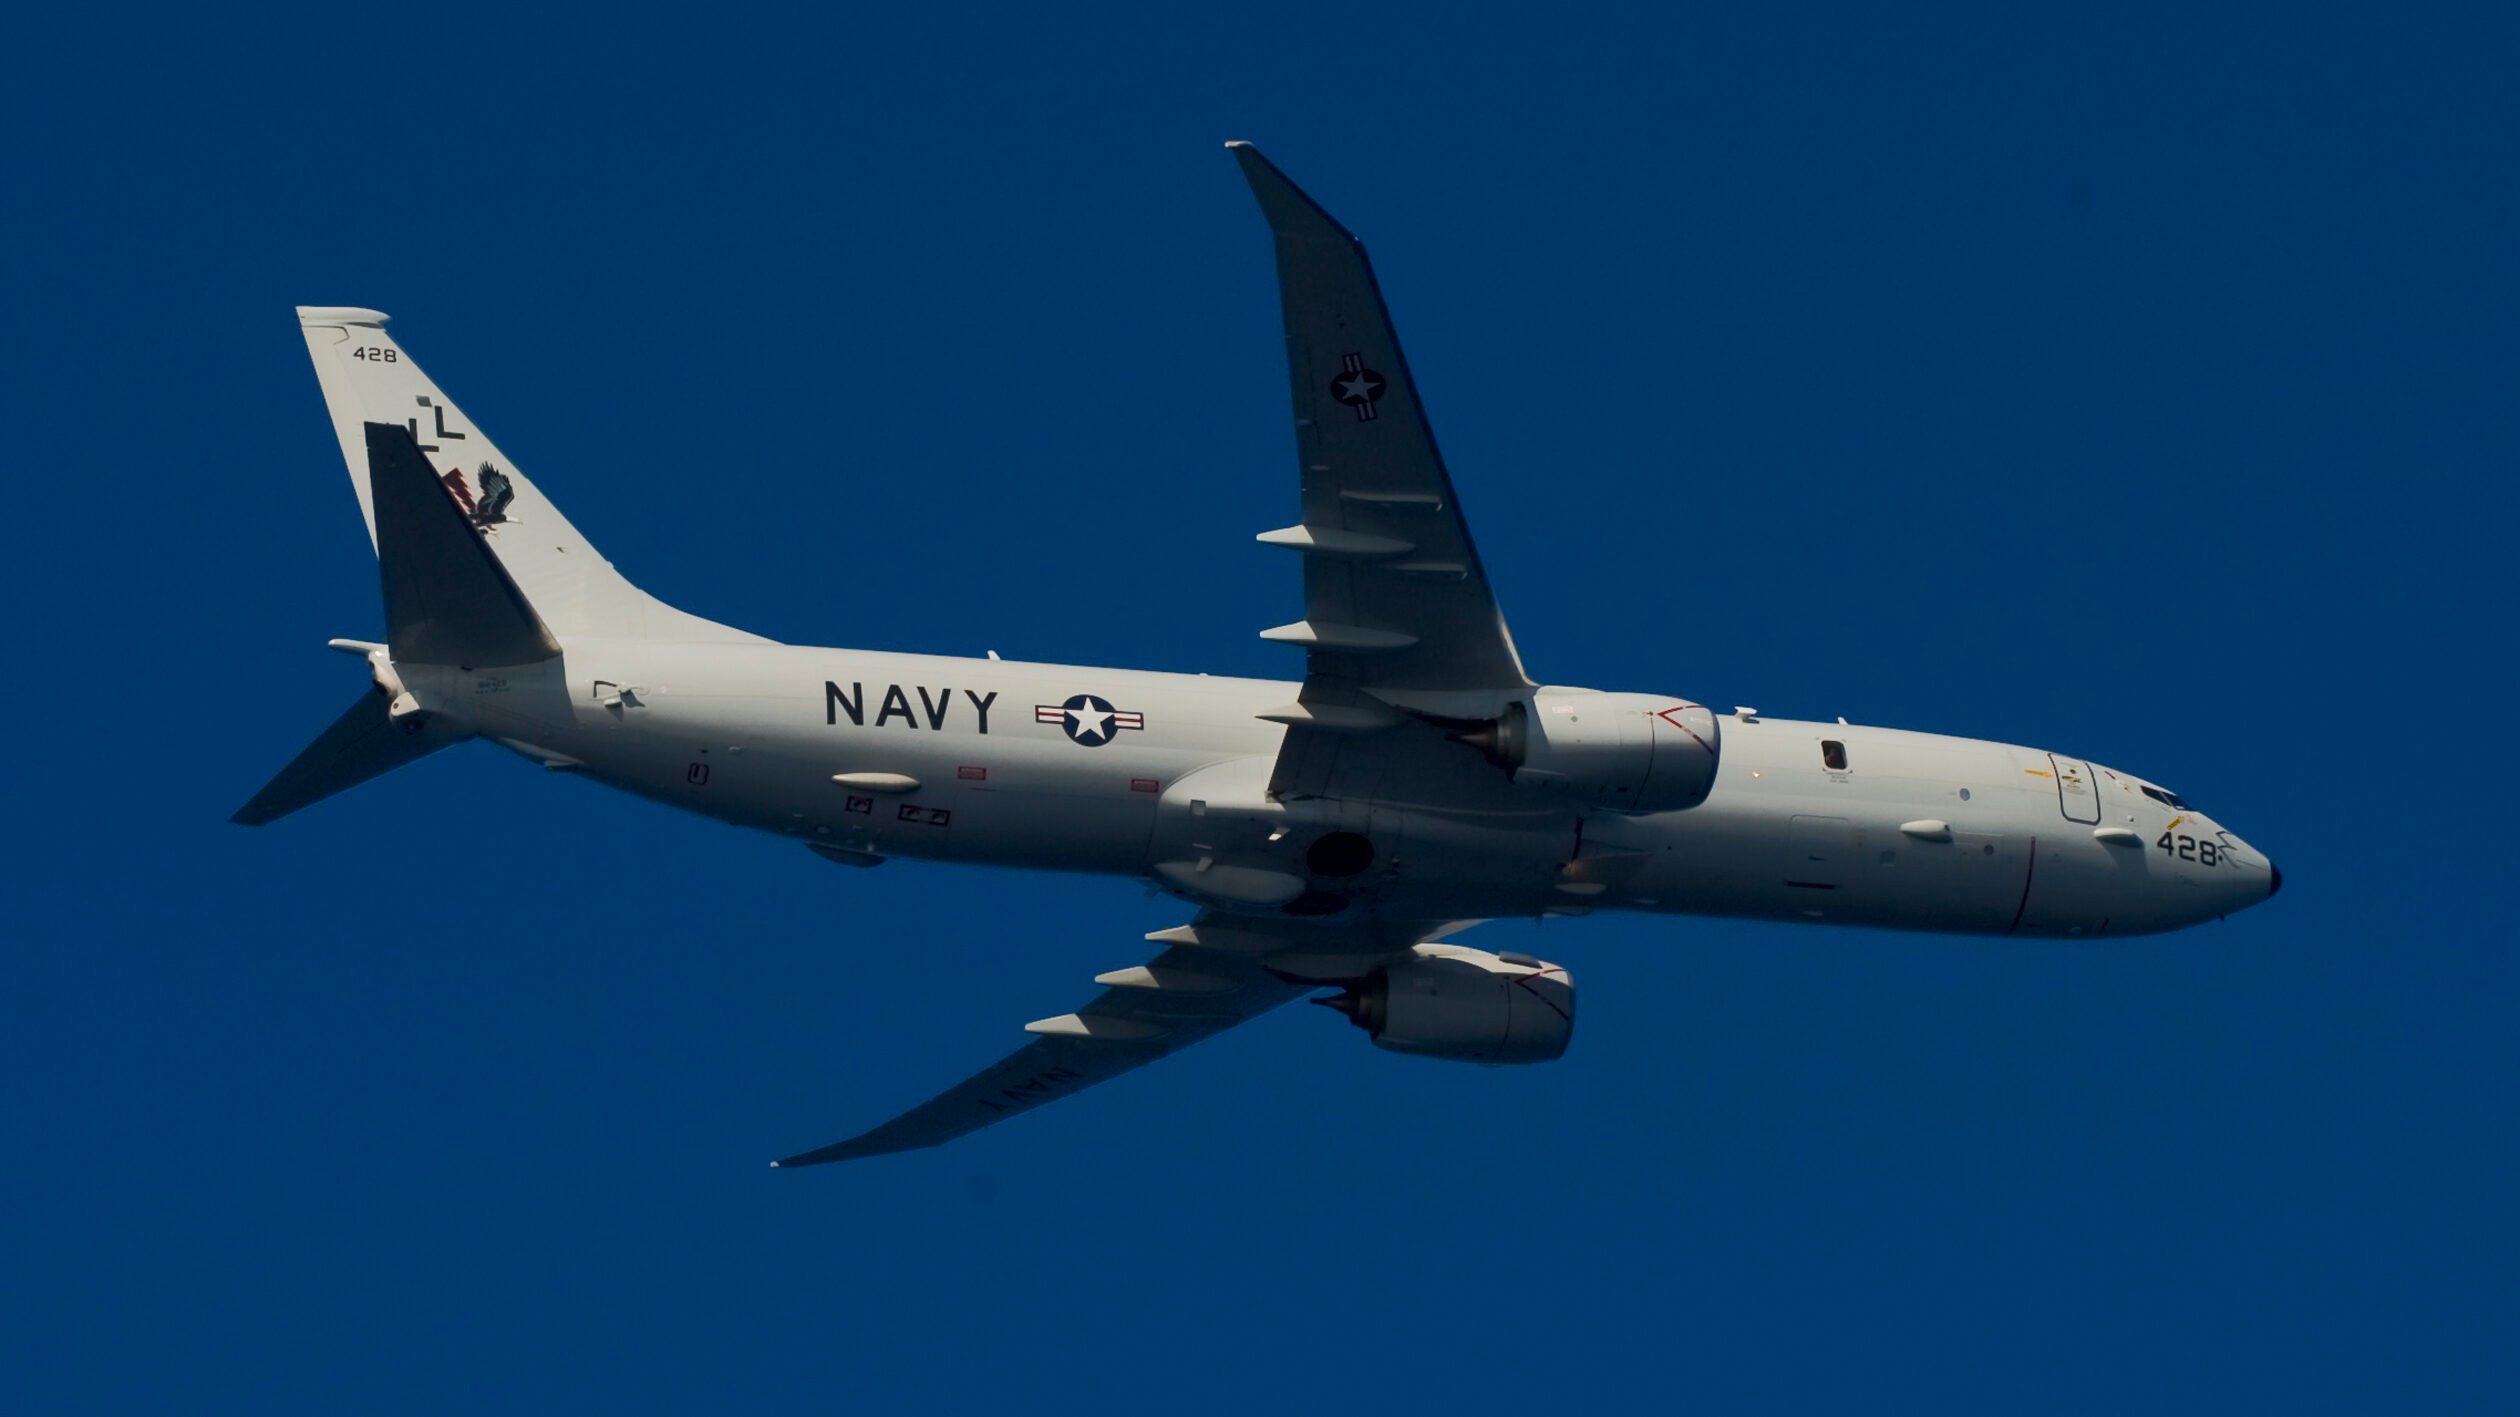 With missile upgrade, P-8A Poseidon brings capacity, complexity to China fight: Analysts